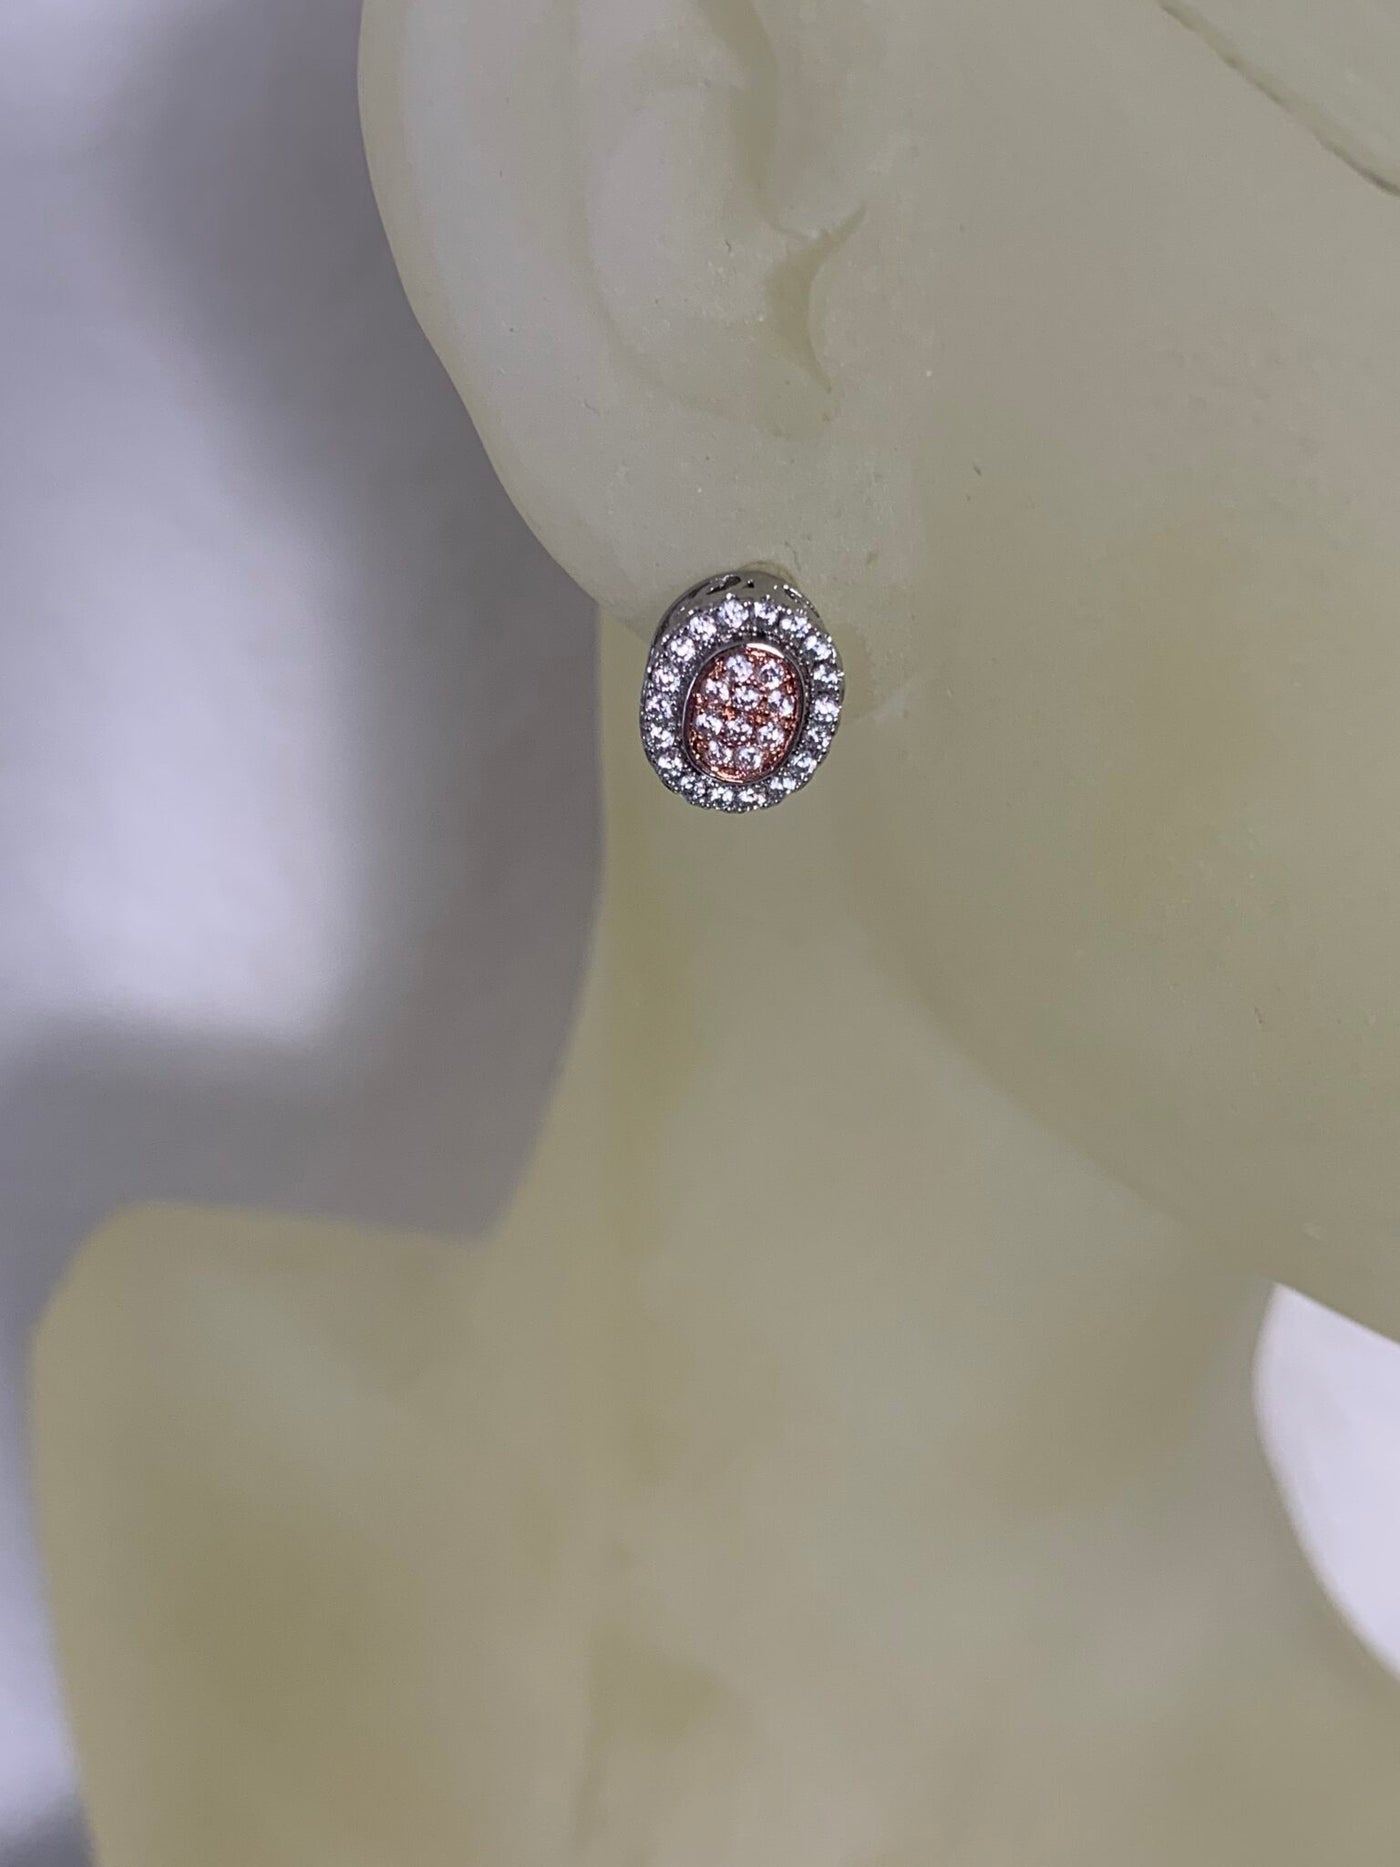 Silver Tone & Rose Gold Tone 2 Tone Stud Earrings with Pave Set Cubic Zirconia